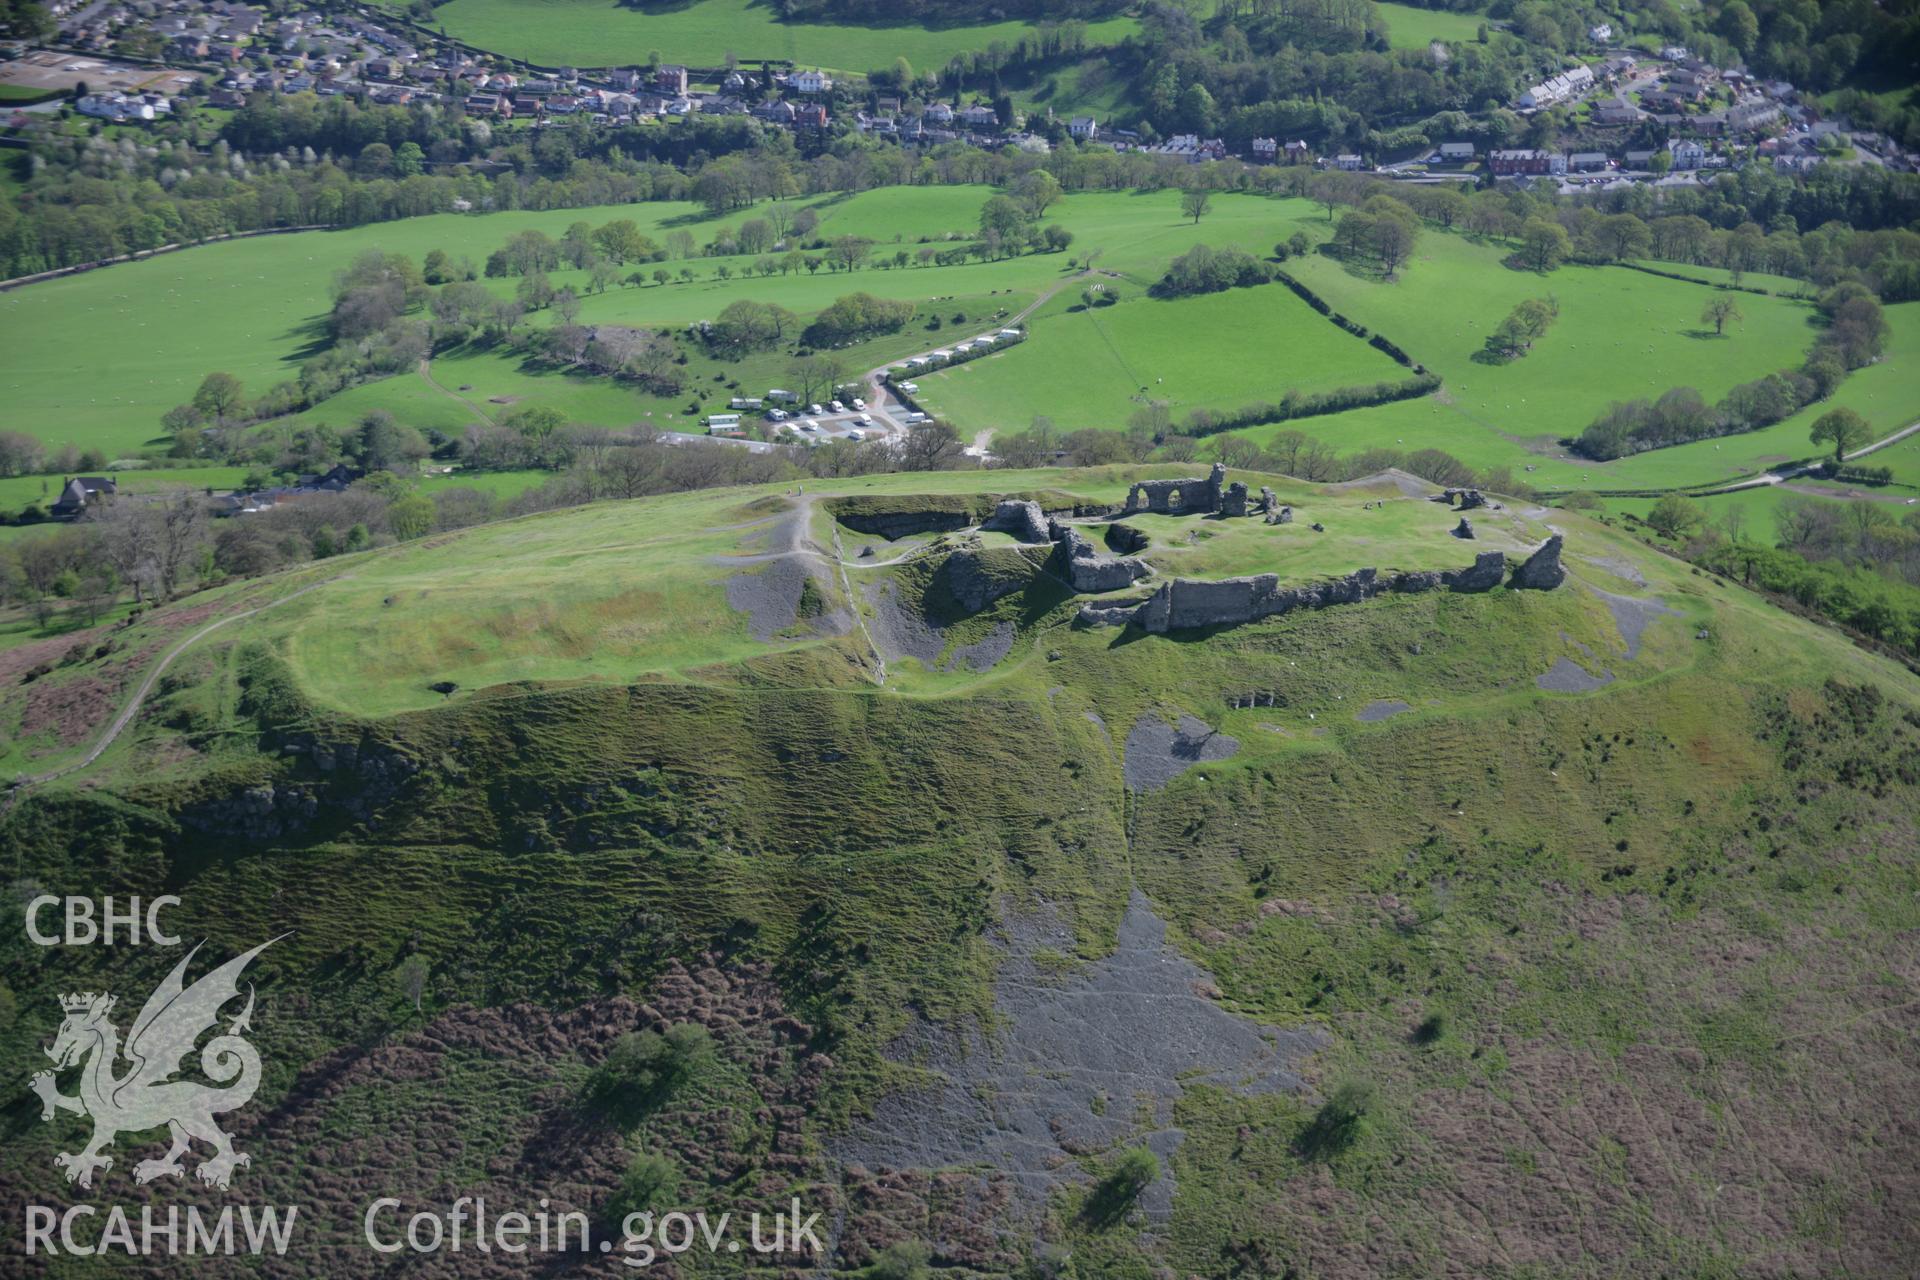 RCAHMW digital colour oblique photograph of Castell Dinas Bran from the north. Taken on 05/05/2006 by T.G. Driver.